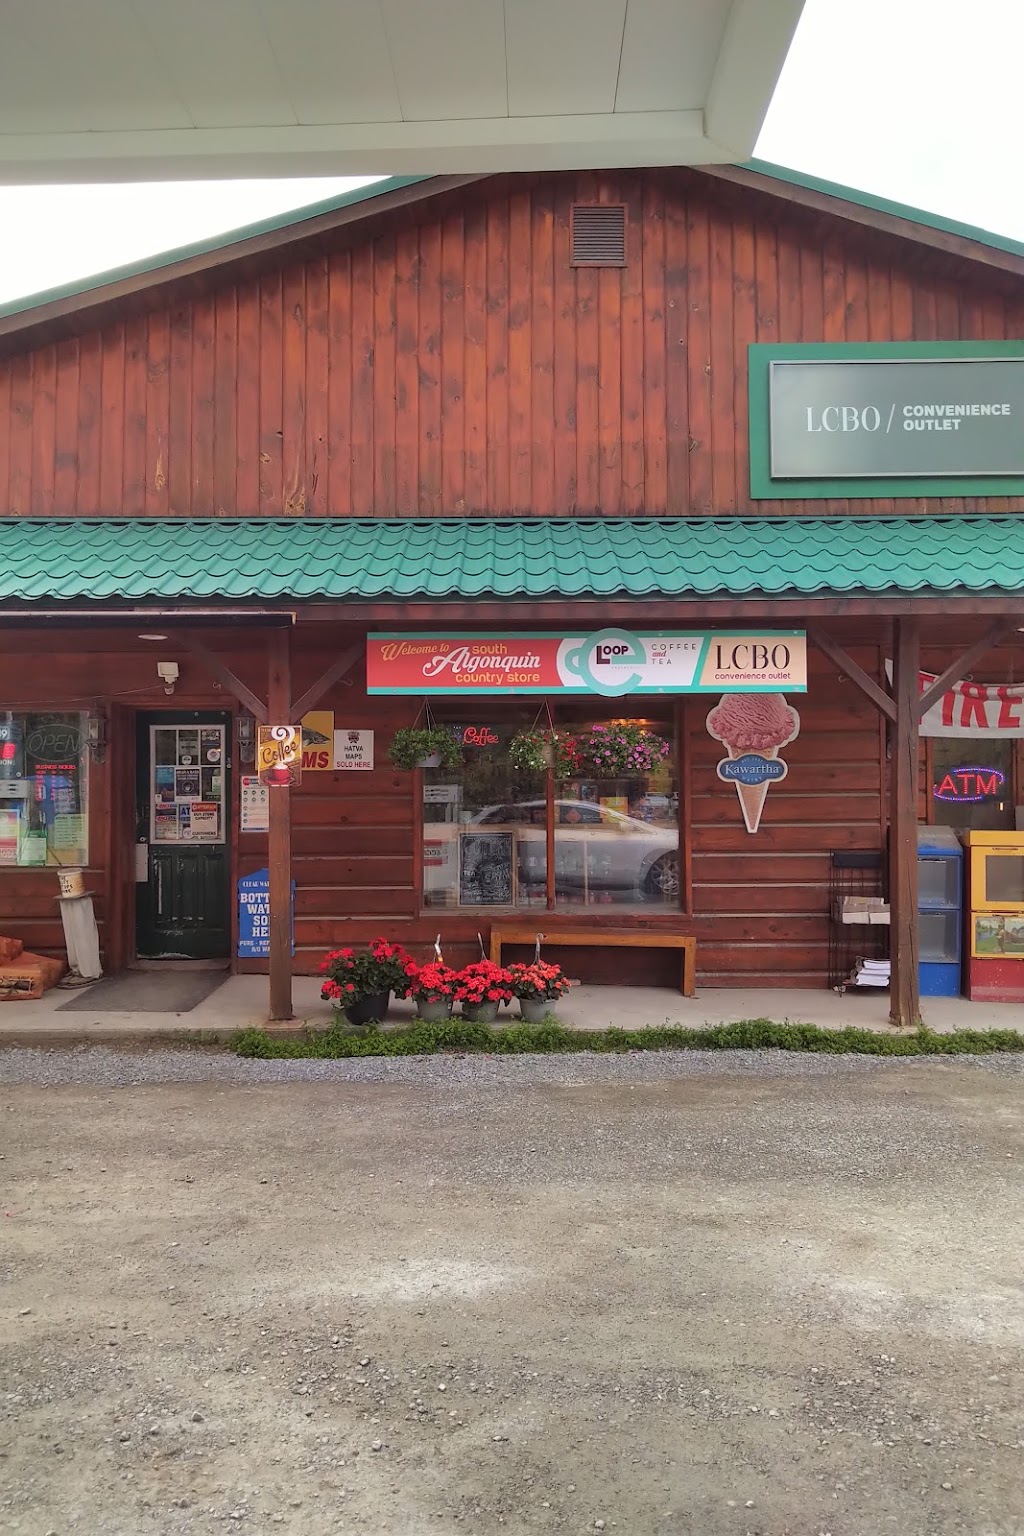 South Algonquin Country Store | cafe | 3895 Loop Rd, Harcourt, ON K0L 1X0, Canada | 7054483788 OR +1 705-448-3788